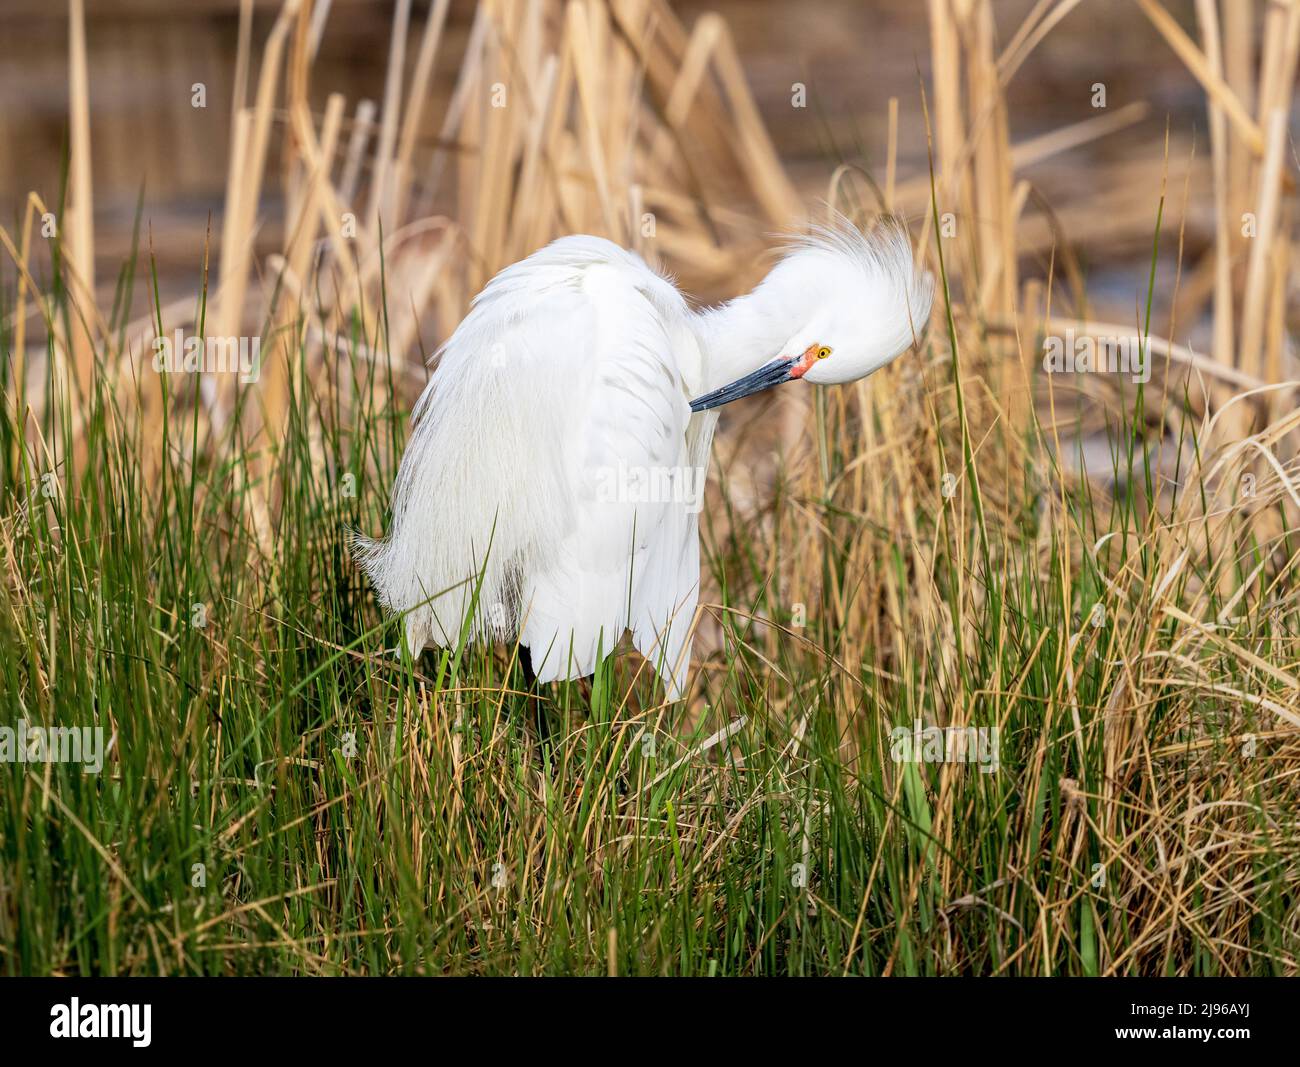 A Snowy Egret with a bright yellow eye and colorful red lore, grooming itself in a natural habitat of cattail reeds and grasses in early Spring. Stock Photo